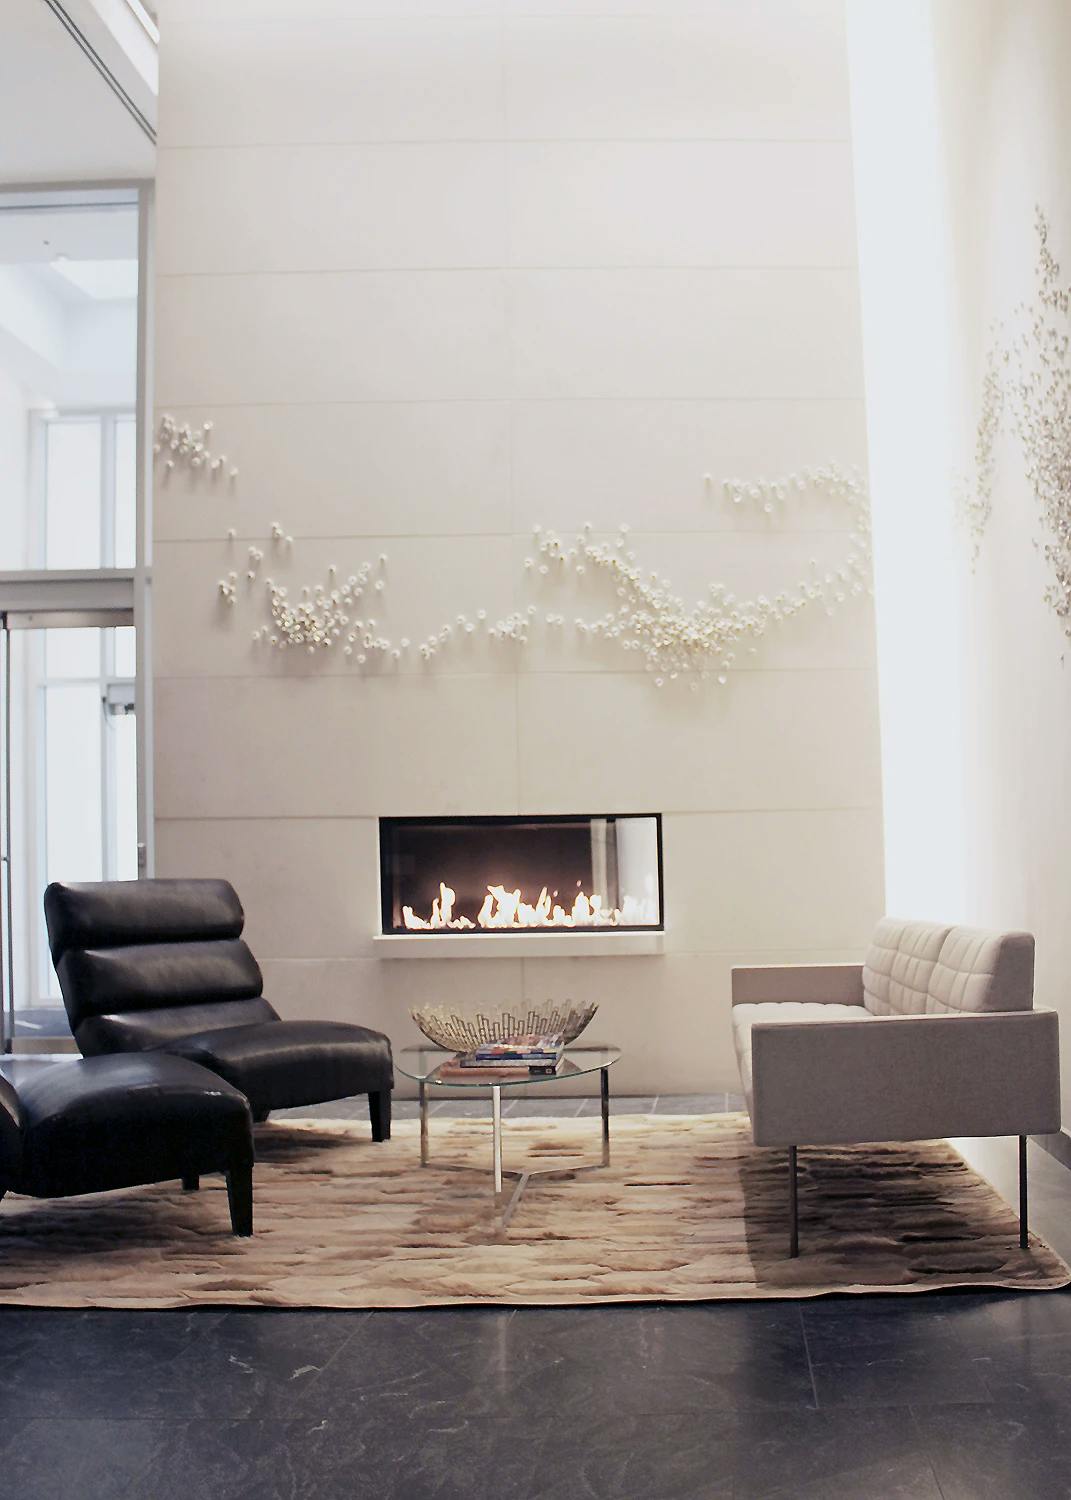 Custom porcelain wall installation by artist Christina Watka above a fireplace in the lounge area of a modern residential building.